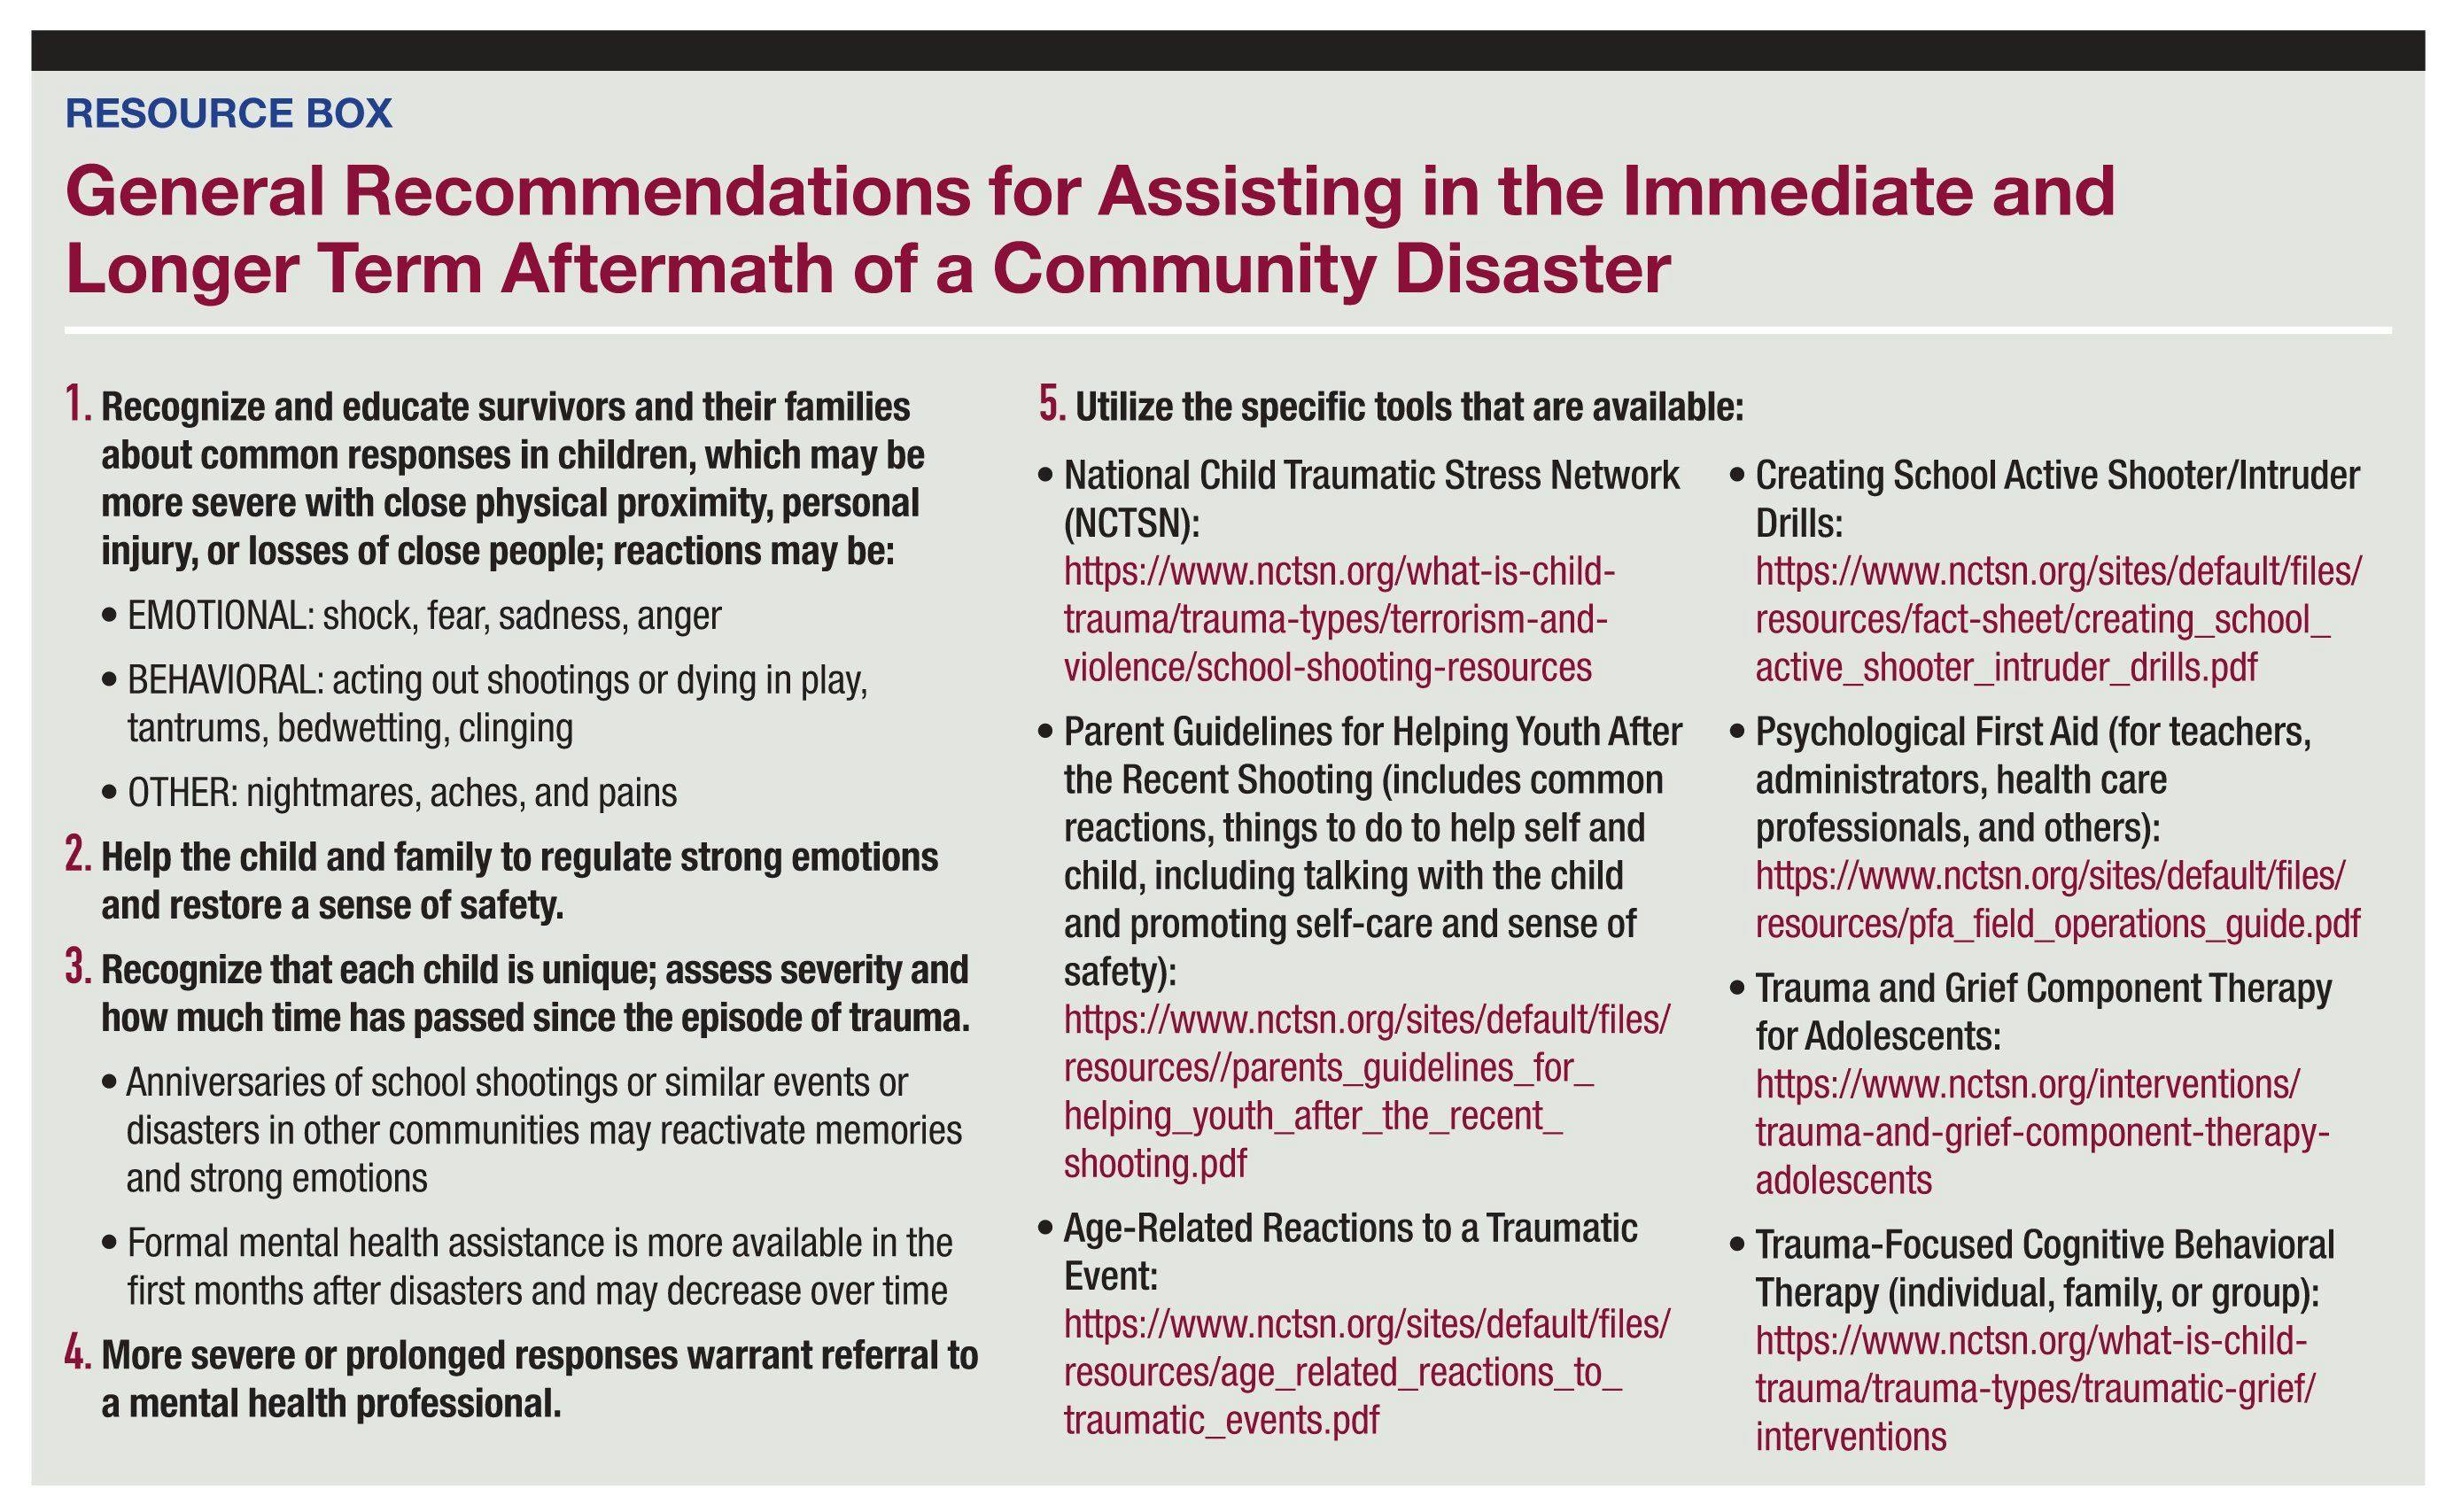 General Recommendations for Assisting in the Immediate and Longer Term Aftermath